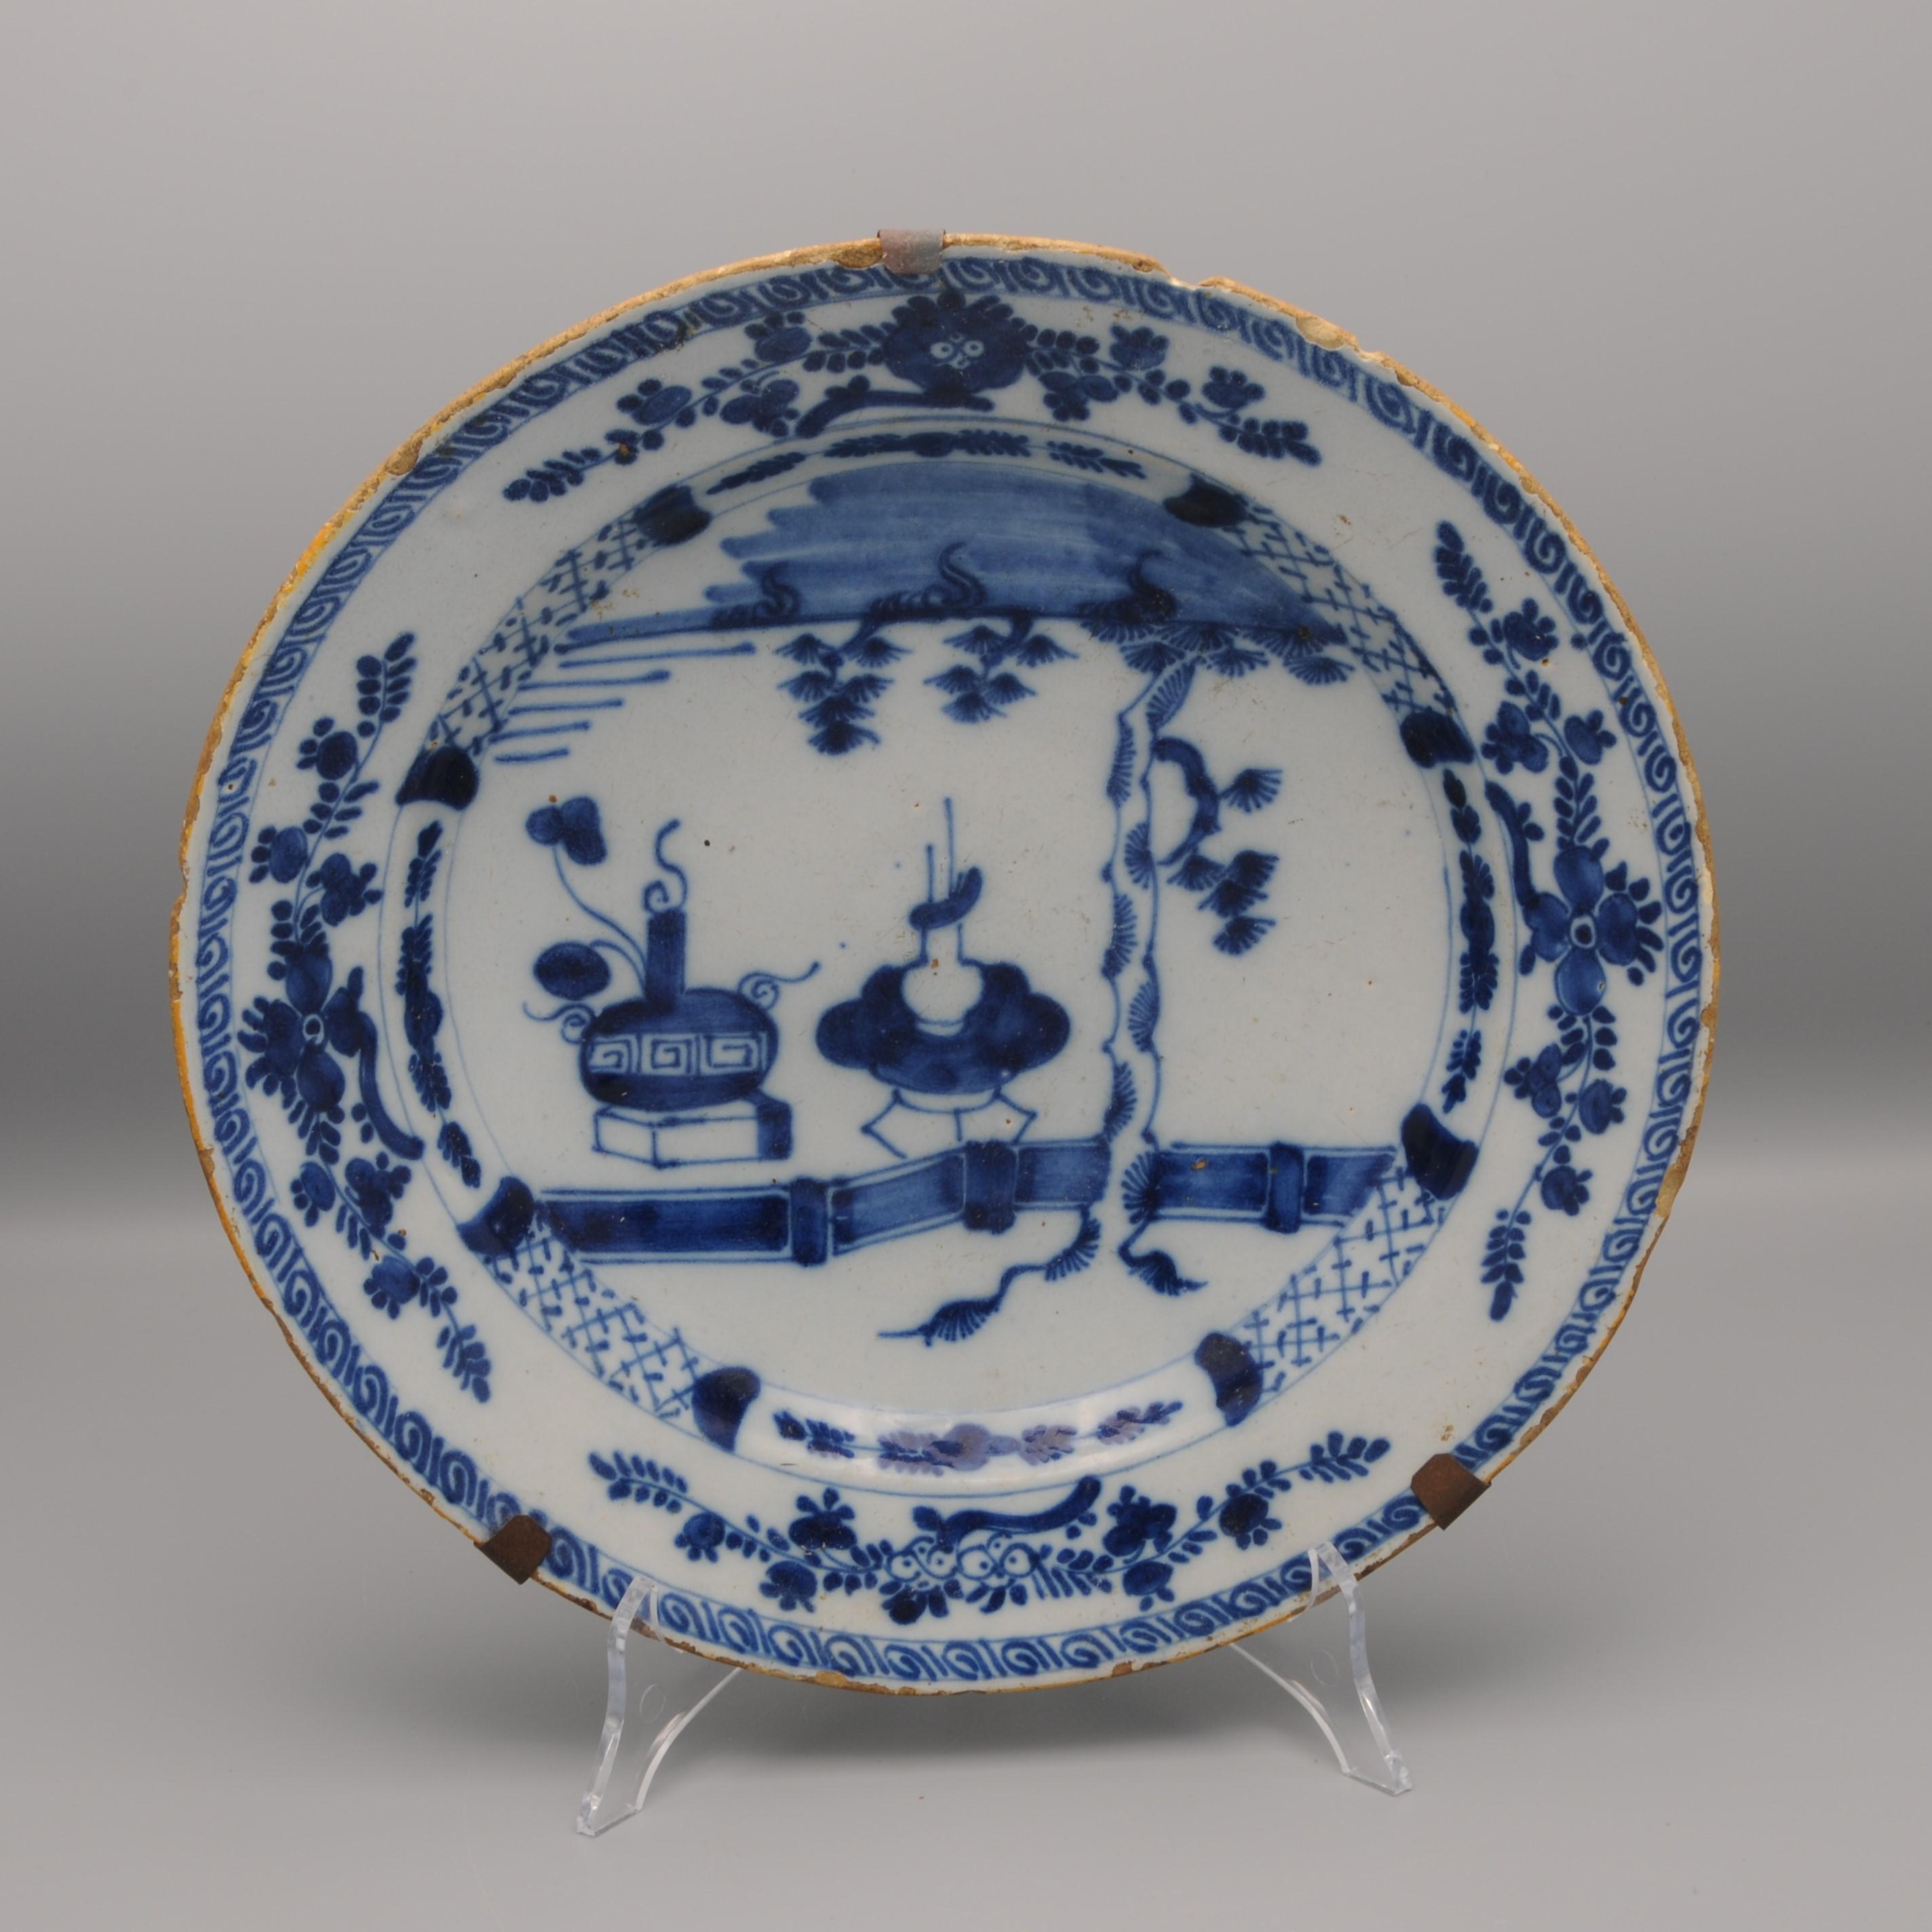 Dutch Delft - Chinoiserie style Charger by De Claauw, mid 18th century For Sale